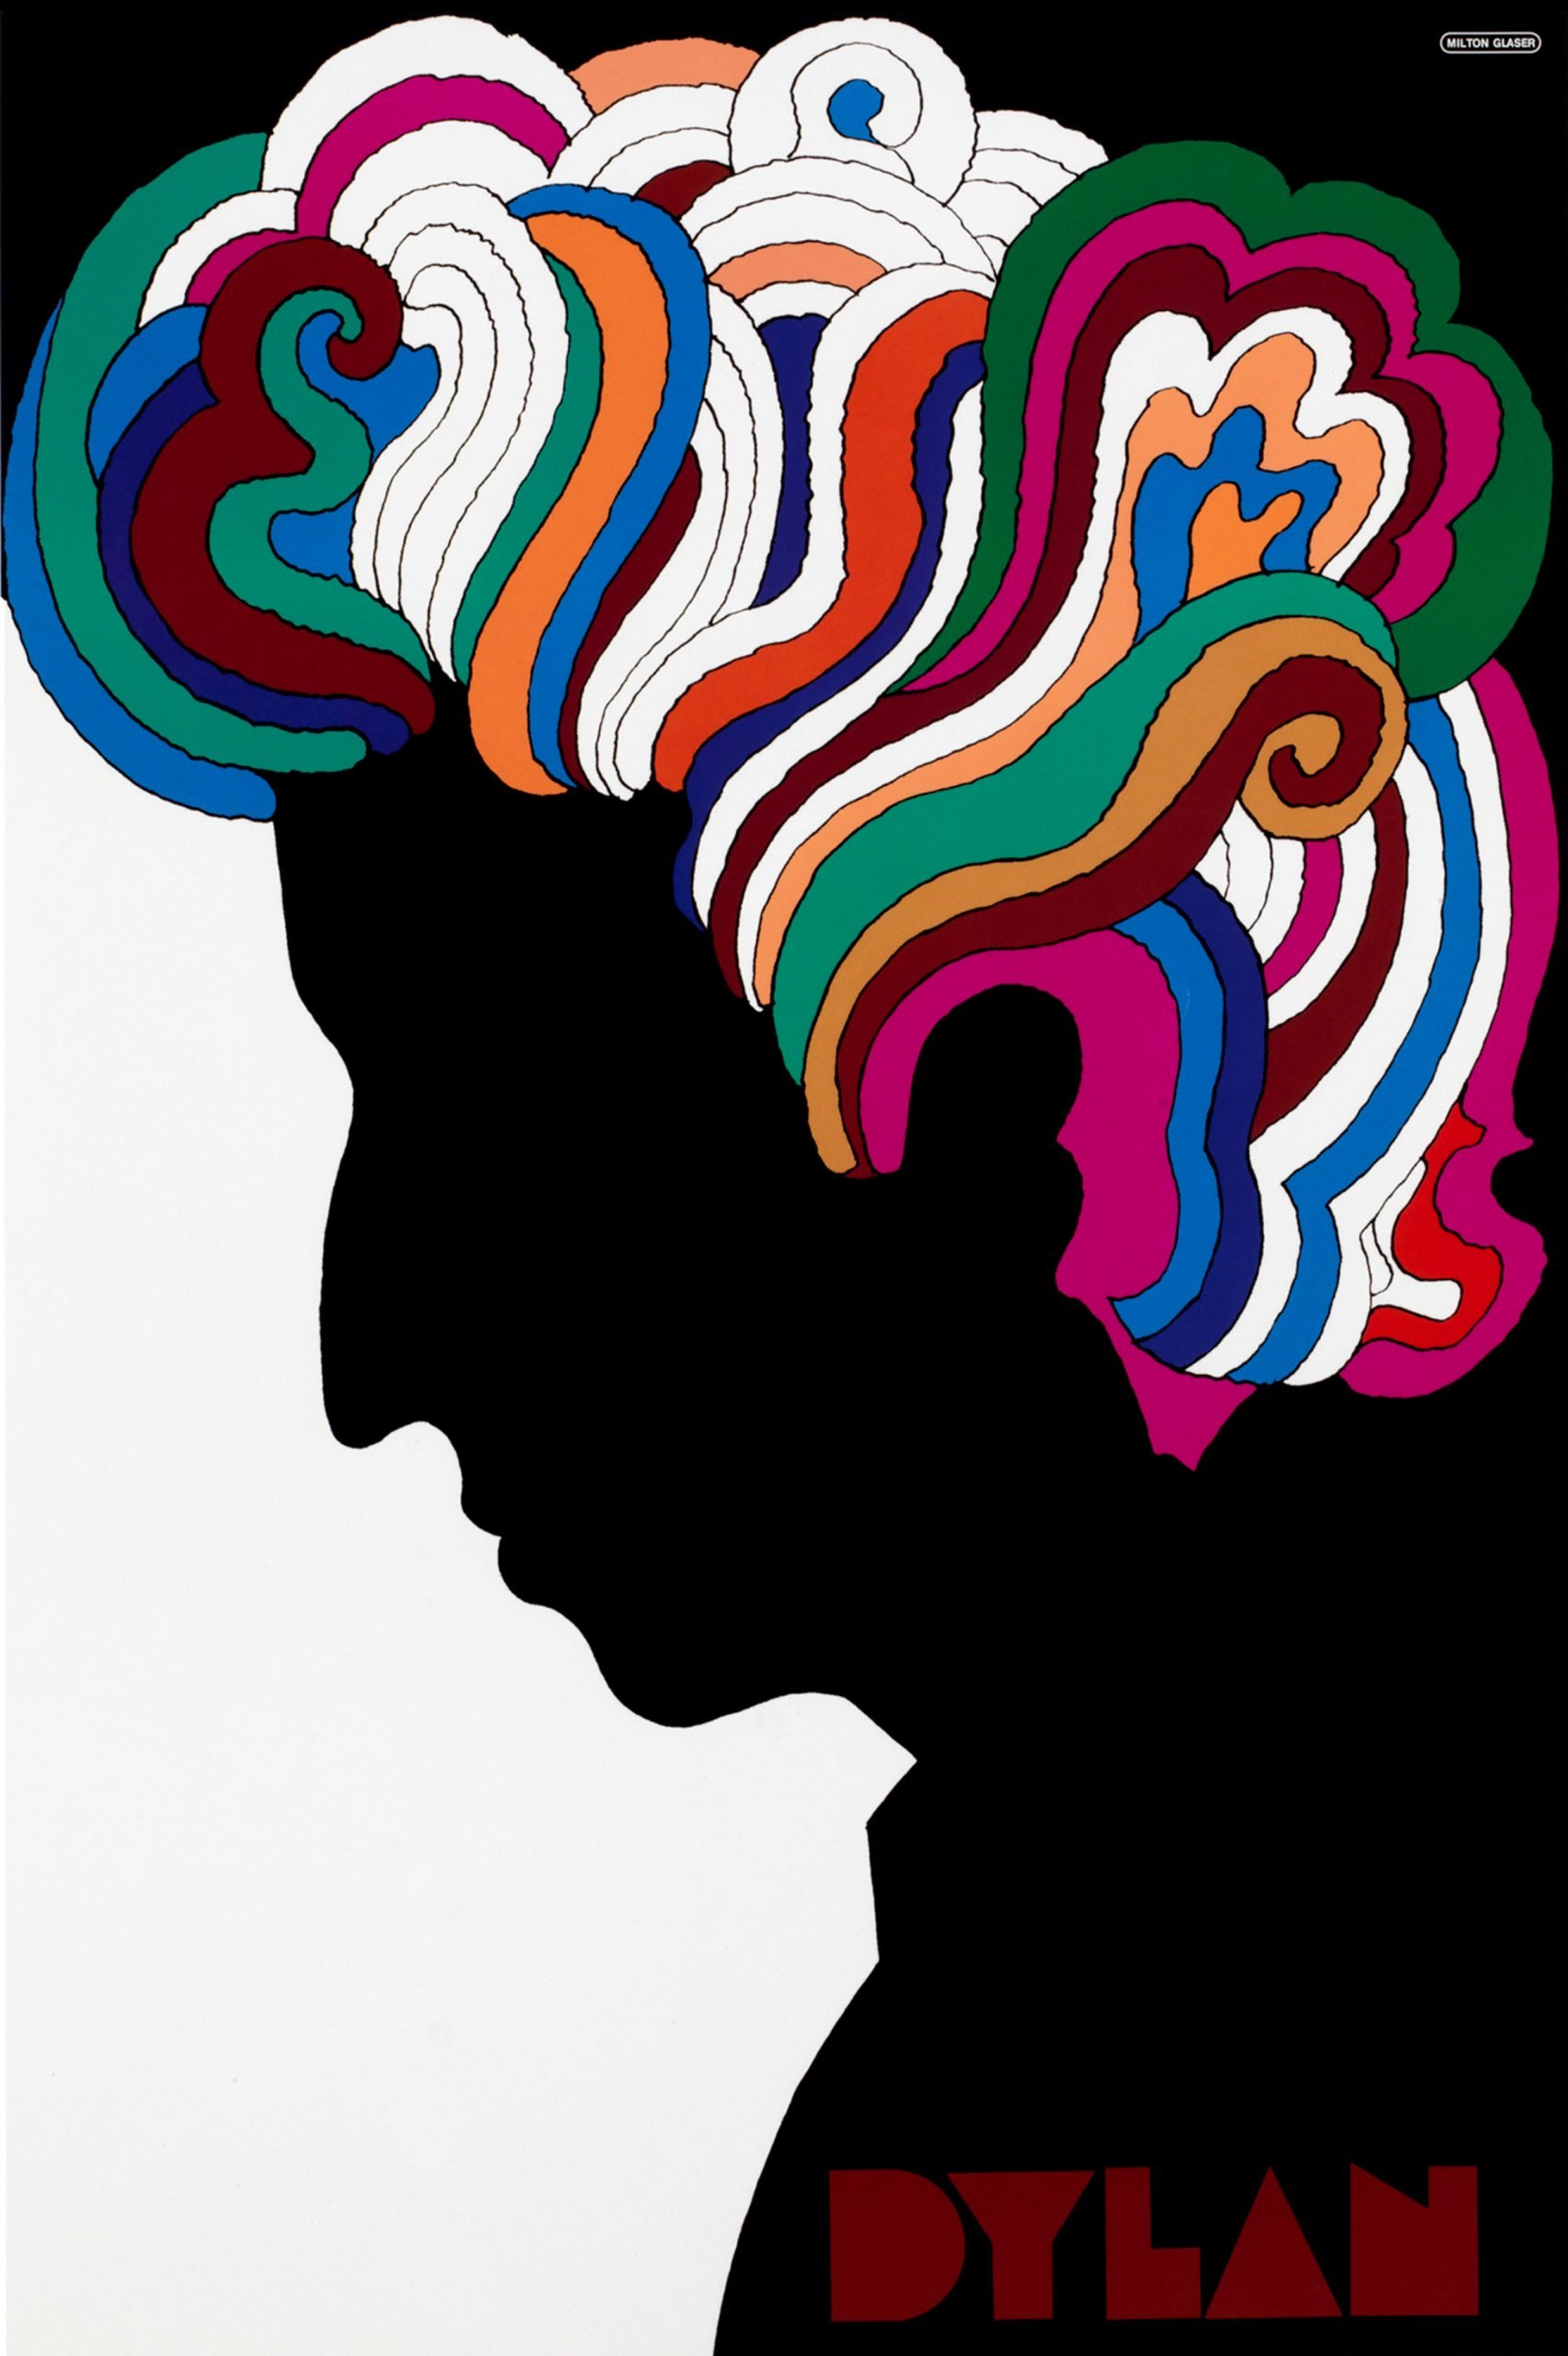 10 memorable graphic design projects by Milton Glaser